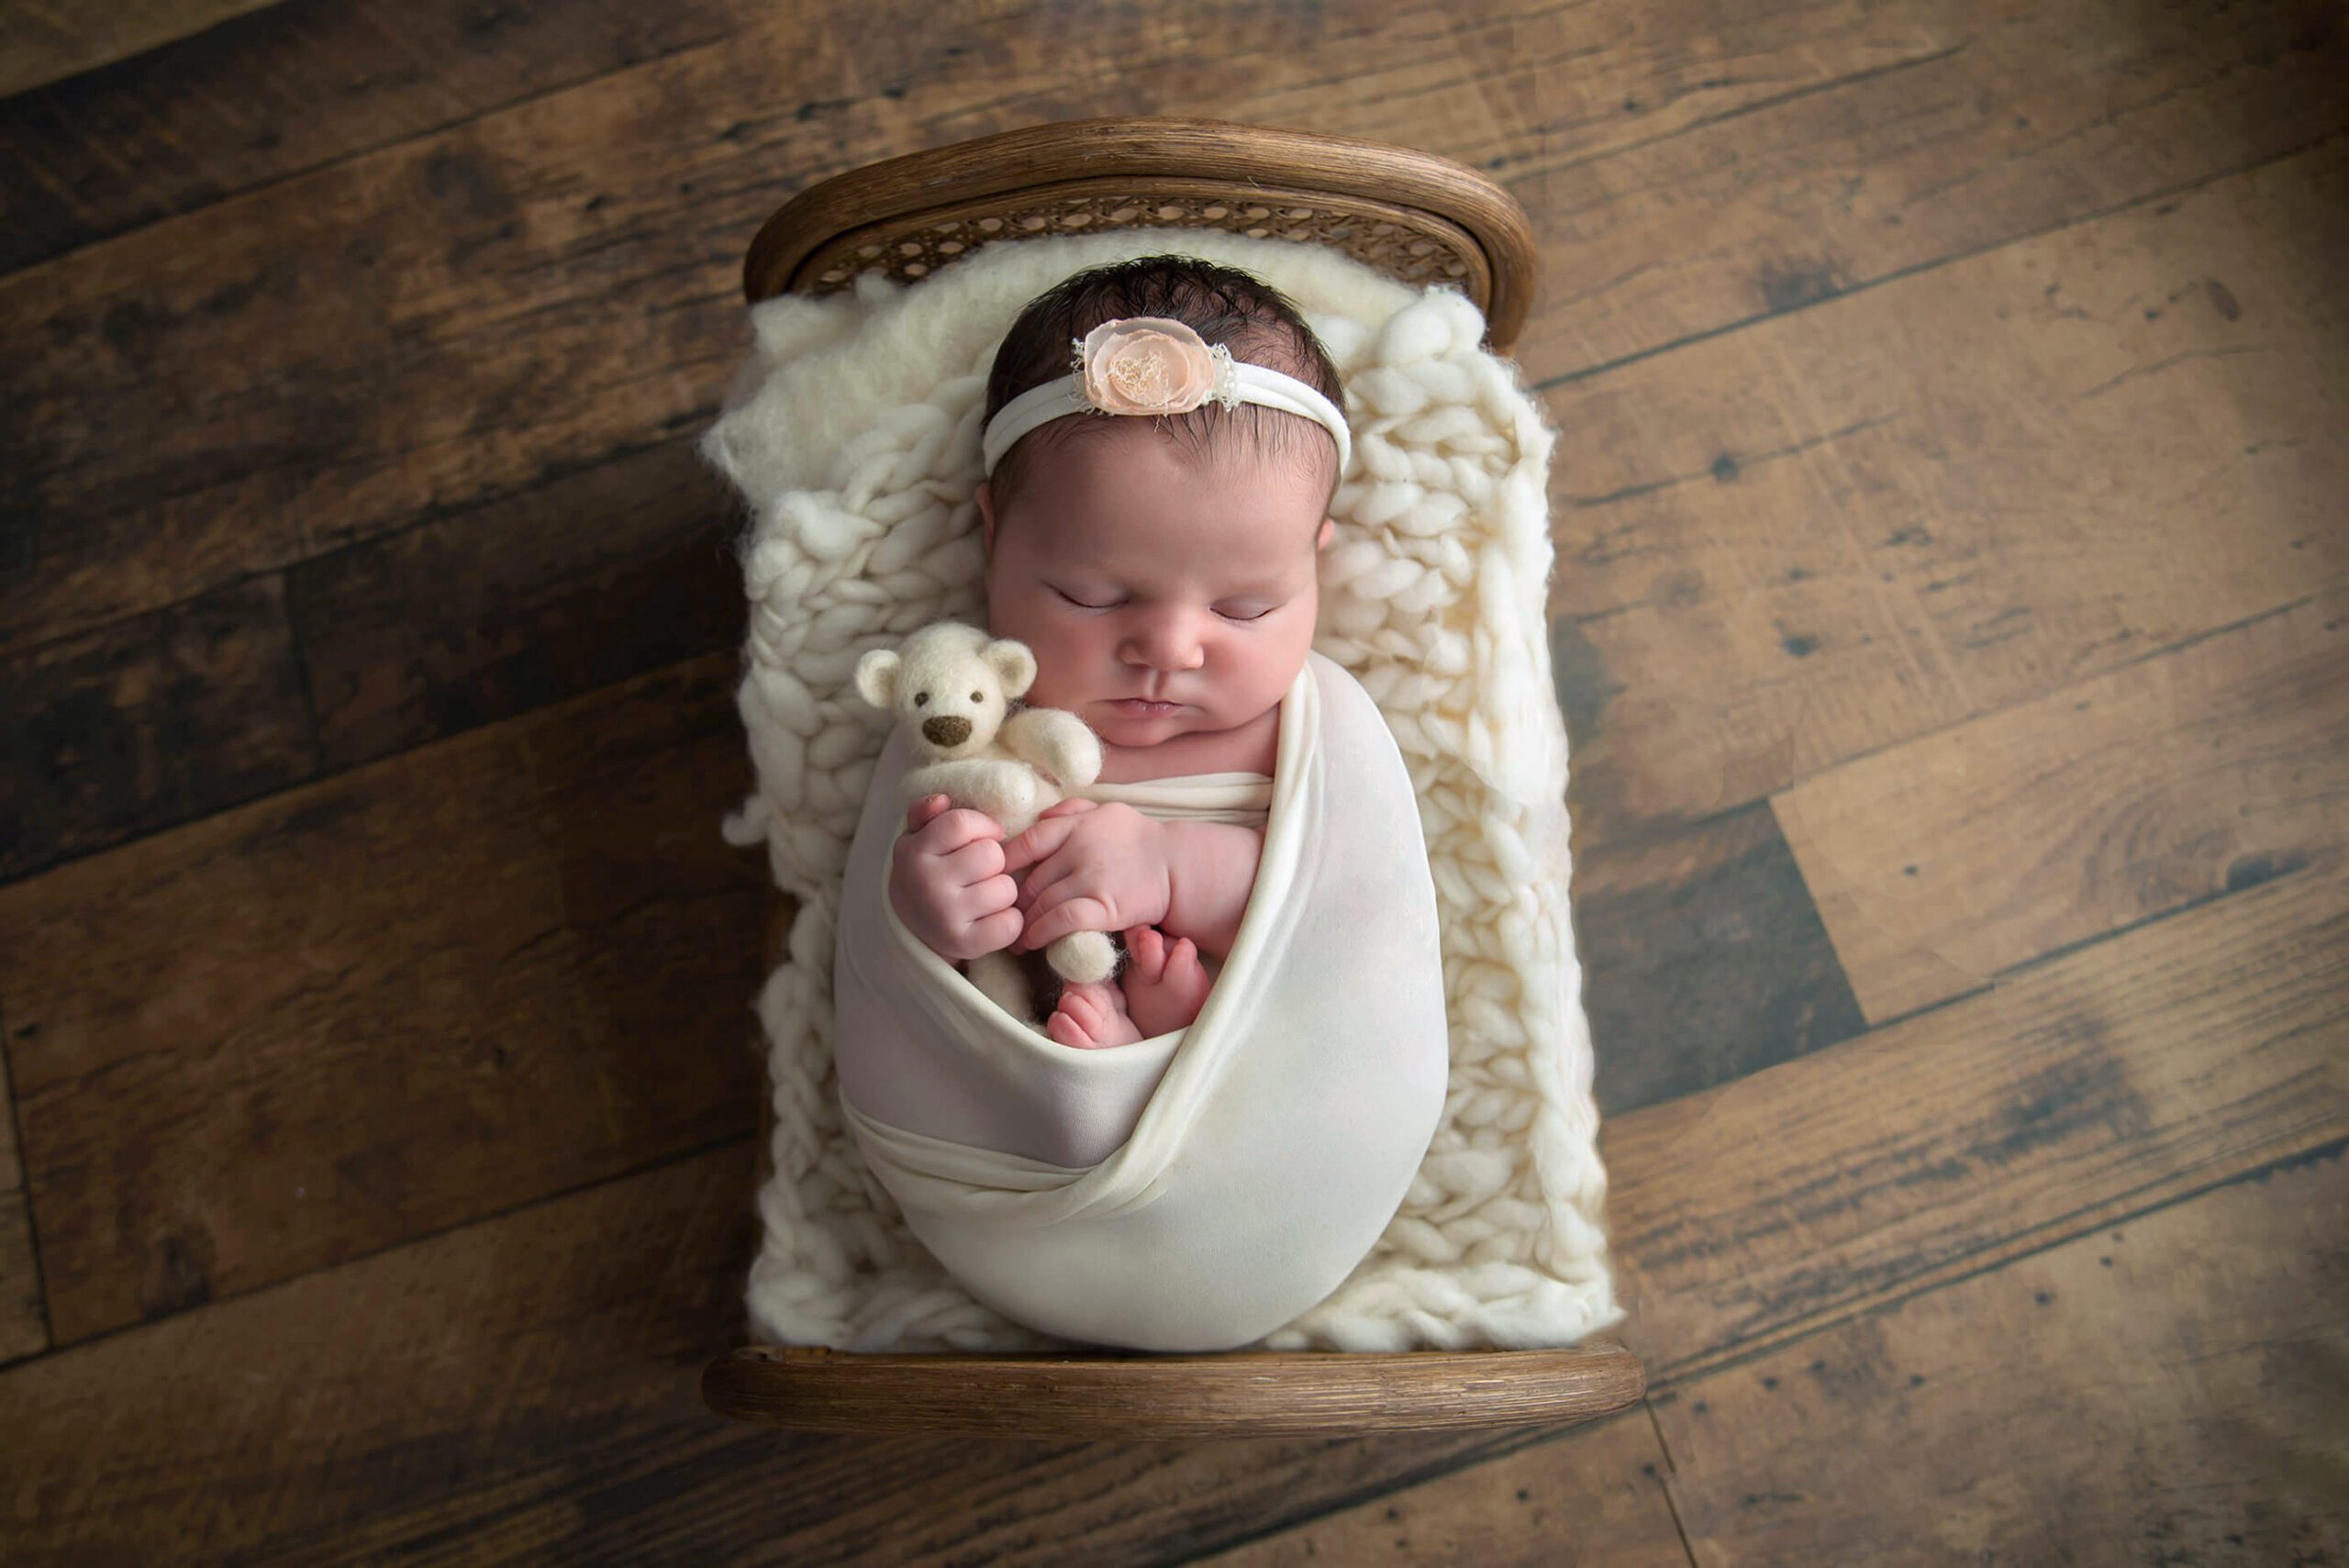 newborn girl in white wrap and white headband holding a teddy bear in a prop bed